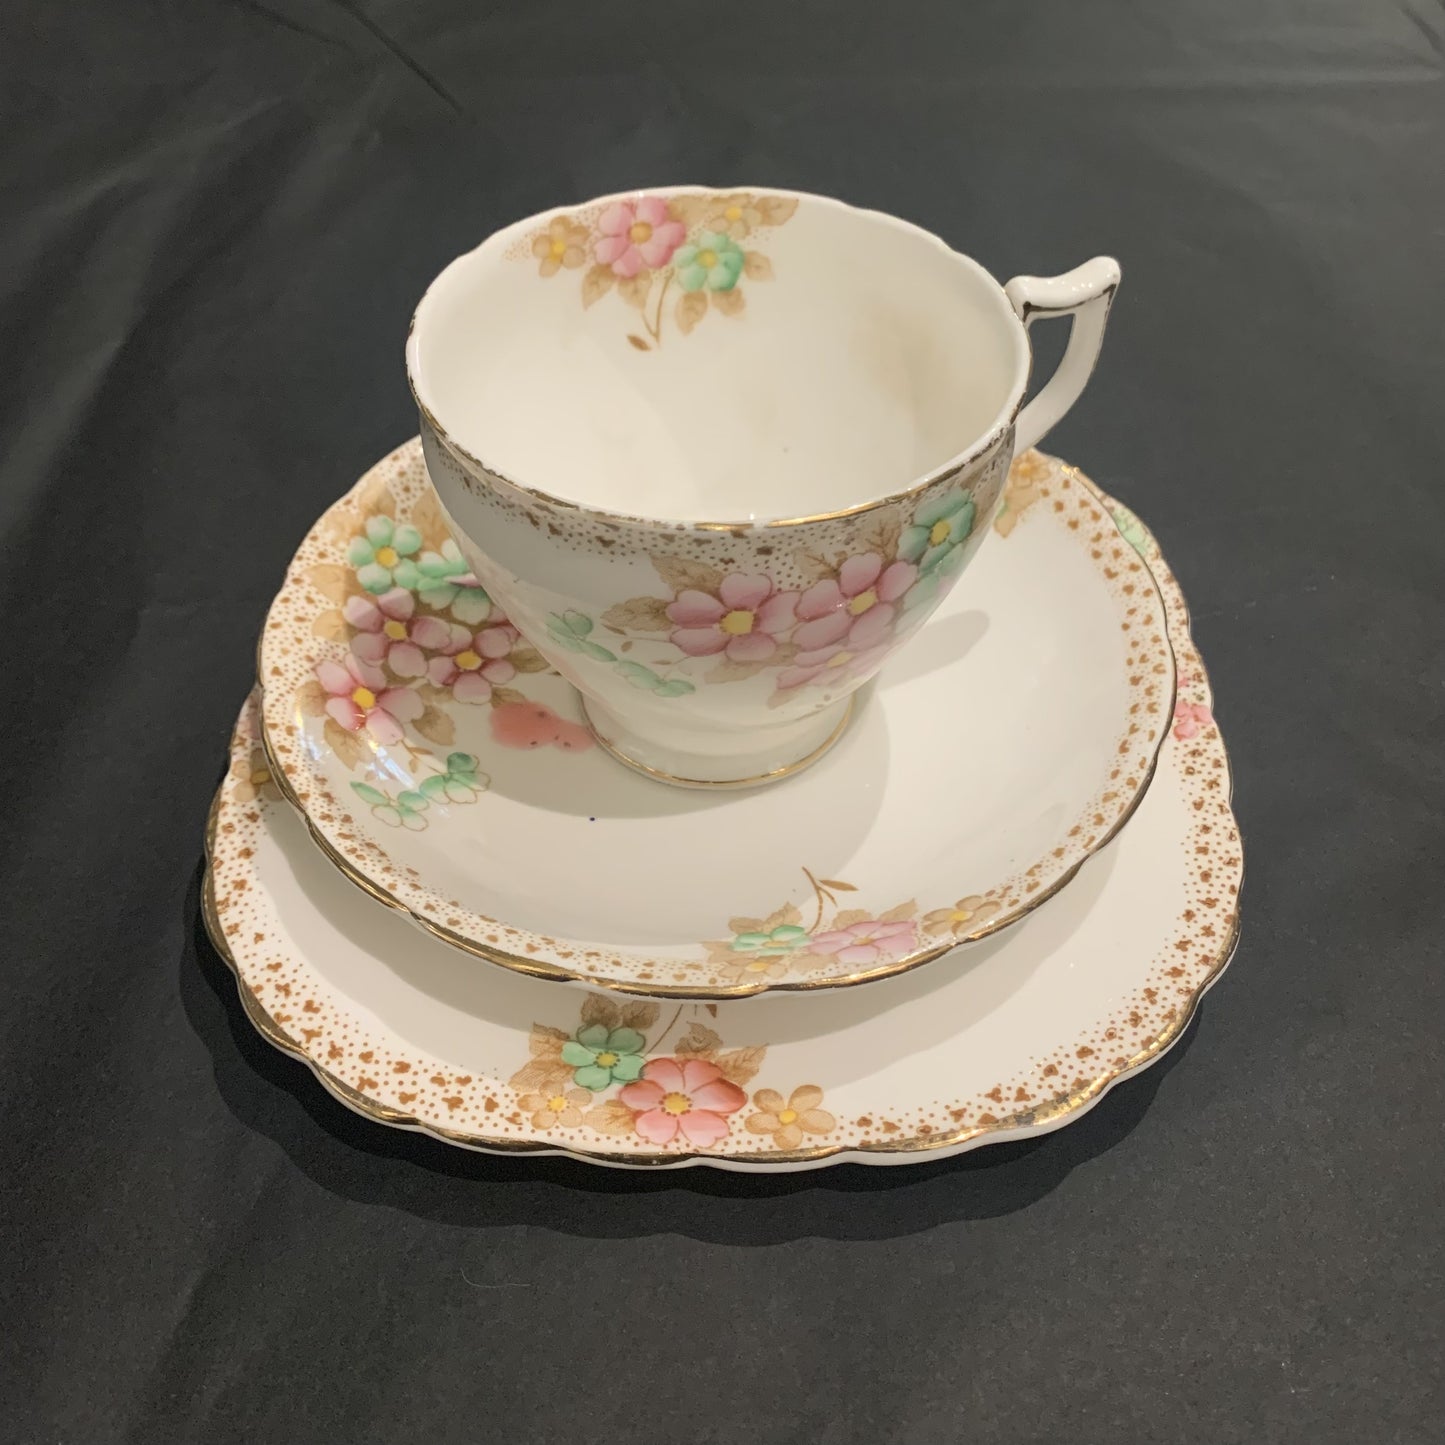 Tea Cup & Saucer set x 3 - Pastel Flowers and Gold